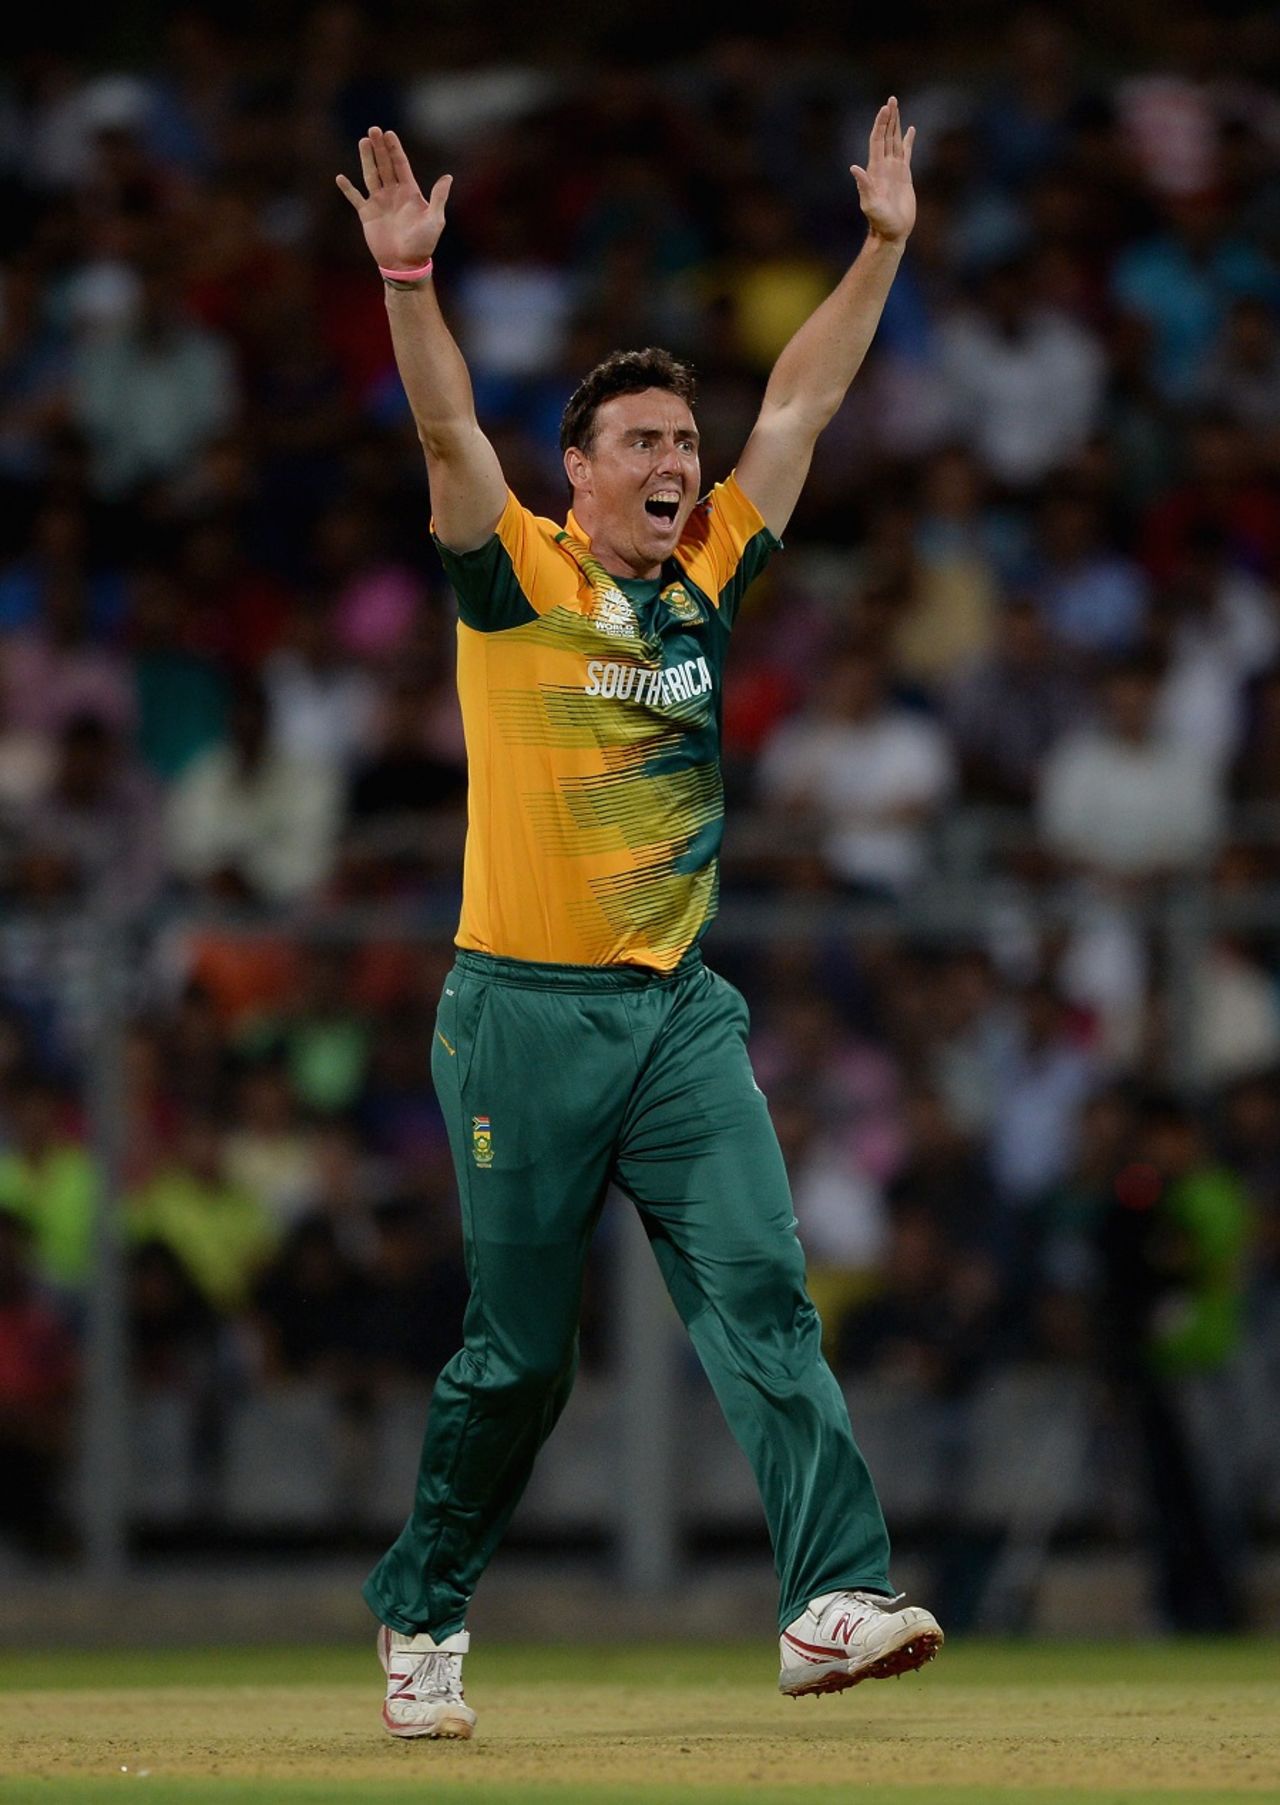 Kyle Abbott goes up in an appeal, India v South Africa, World T20 warm-ups, Mumbai, March 12, 2016